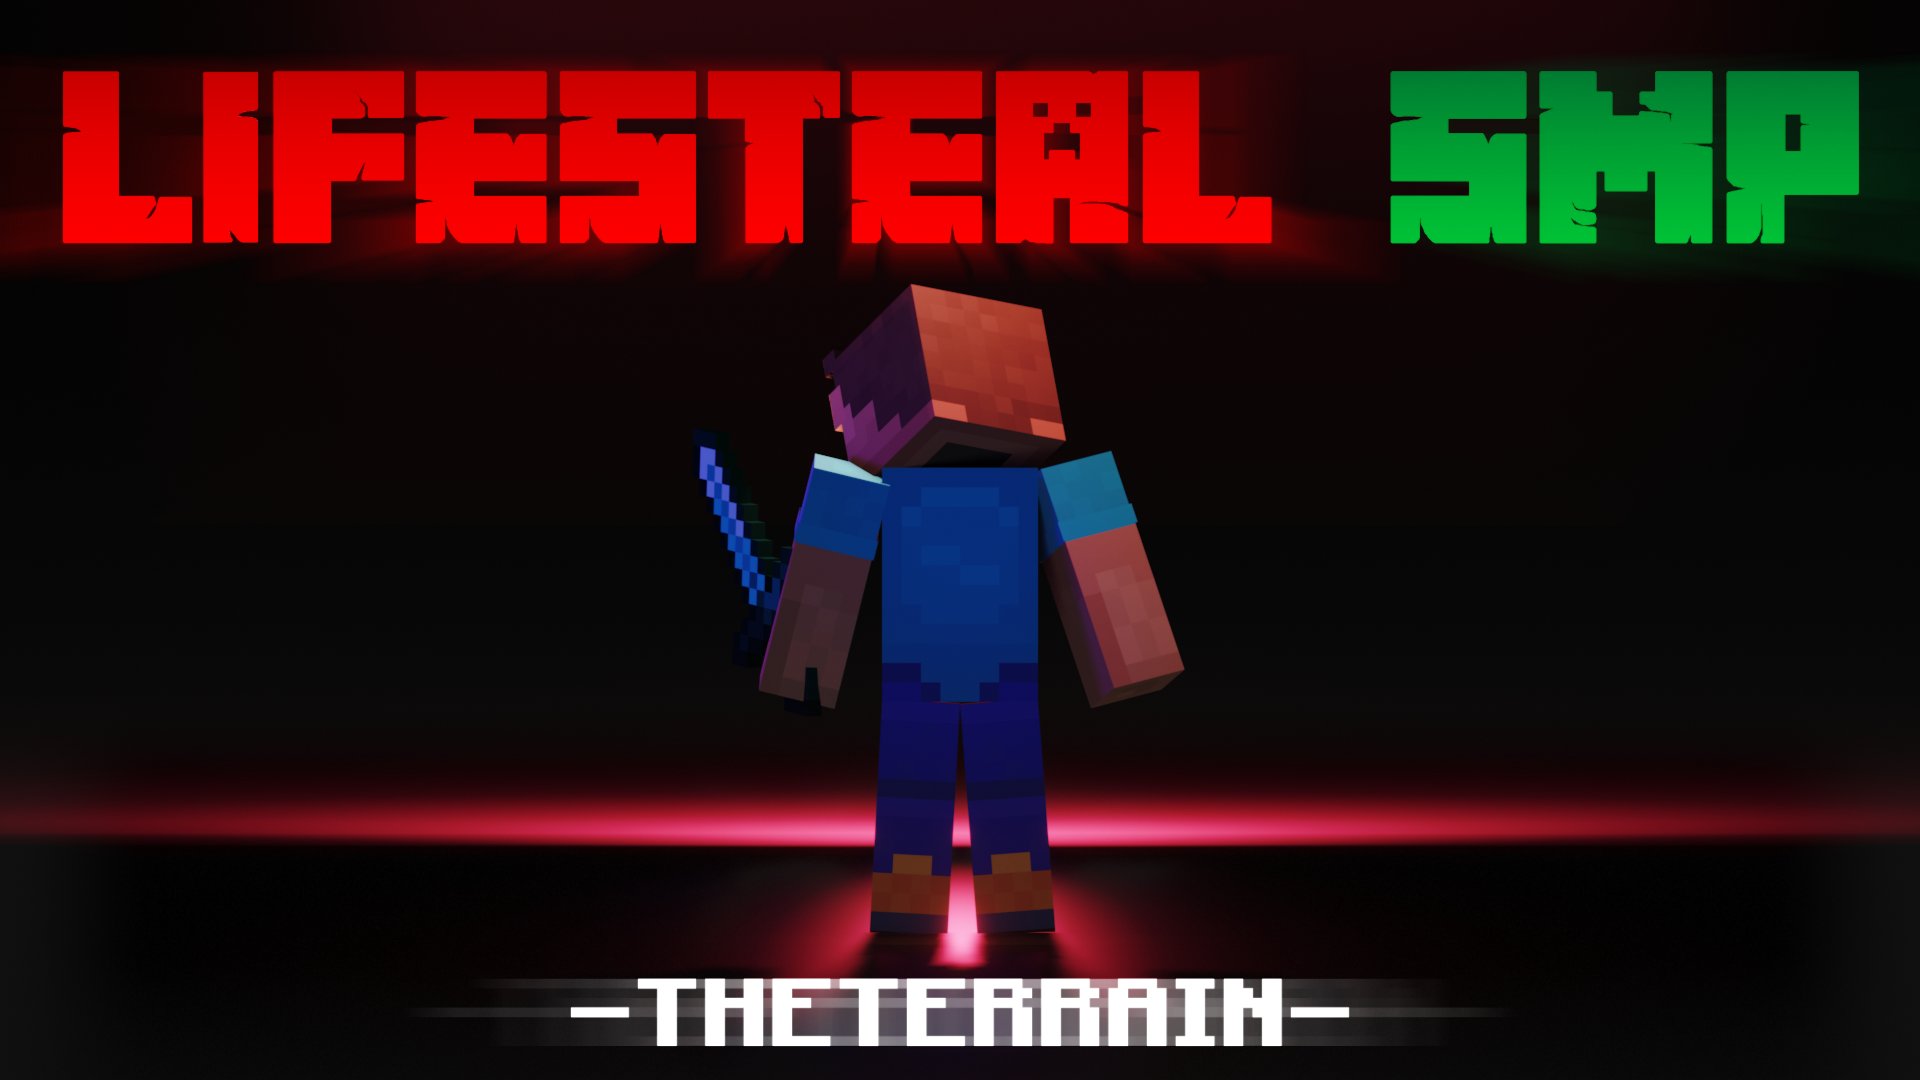 TheTerrain - ❤ LIFESTEAL SMP: SEASON THREE CONTENT SOON!!! ❤ #lifestealsmp thinking about killing or sumthin idk